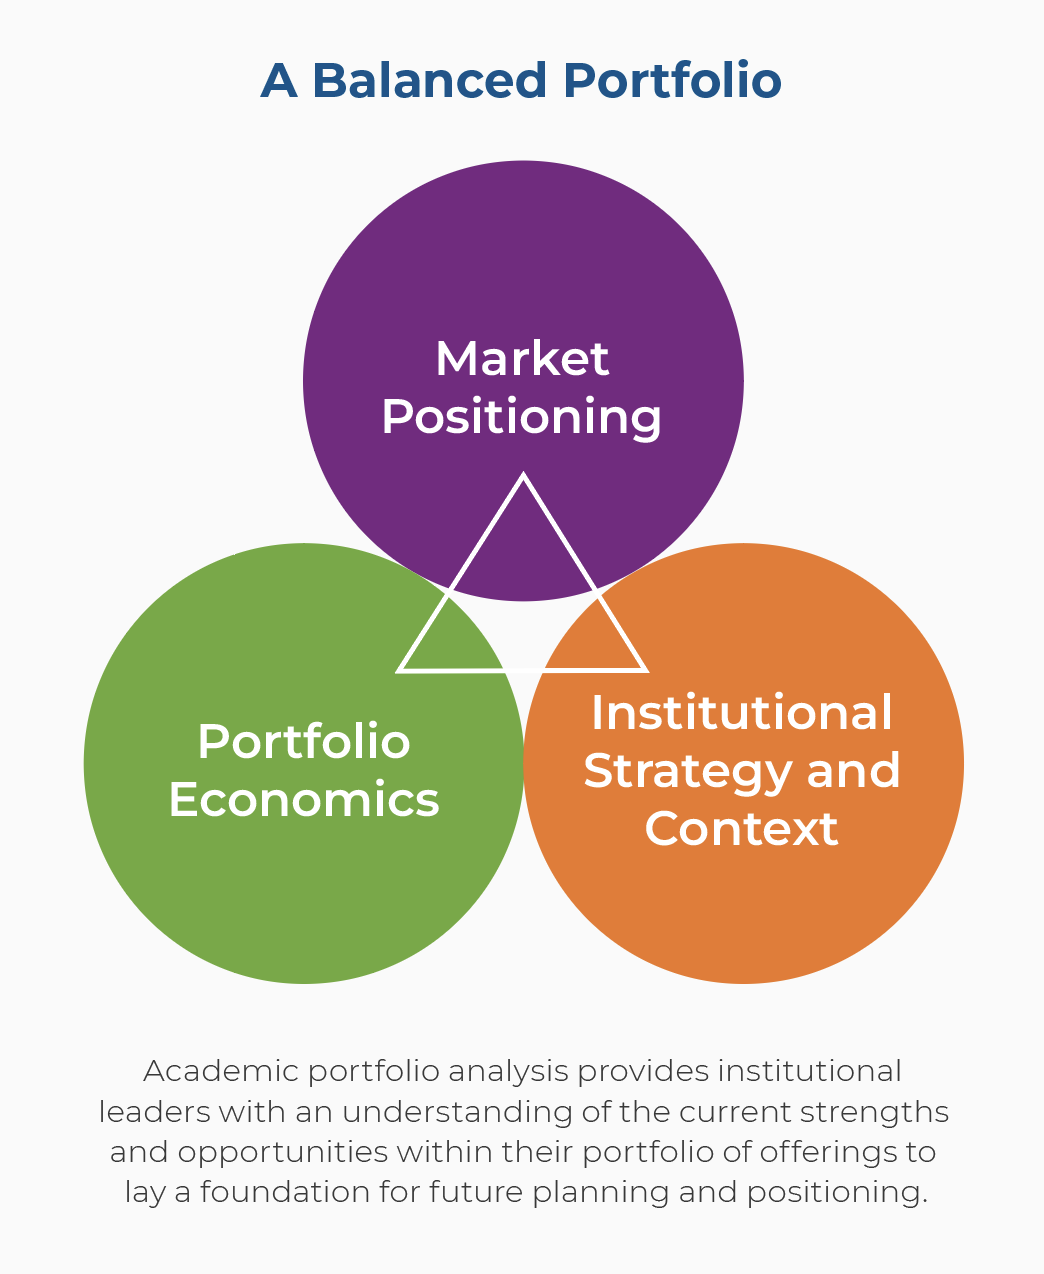 A graphic showing the intersection of market positioning, portfolio economics, and institutional strategy and context as part of a balanced approach to academic portfolio analysis.